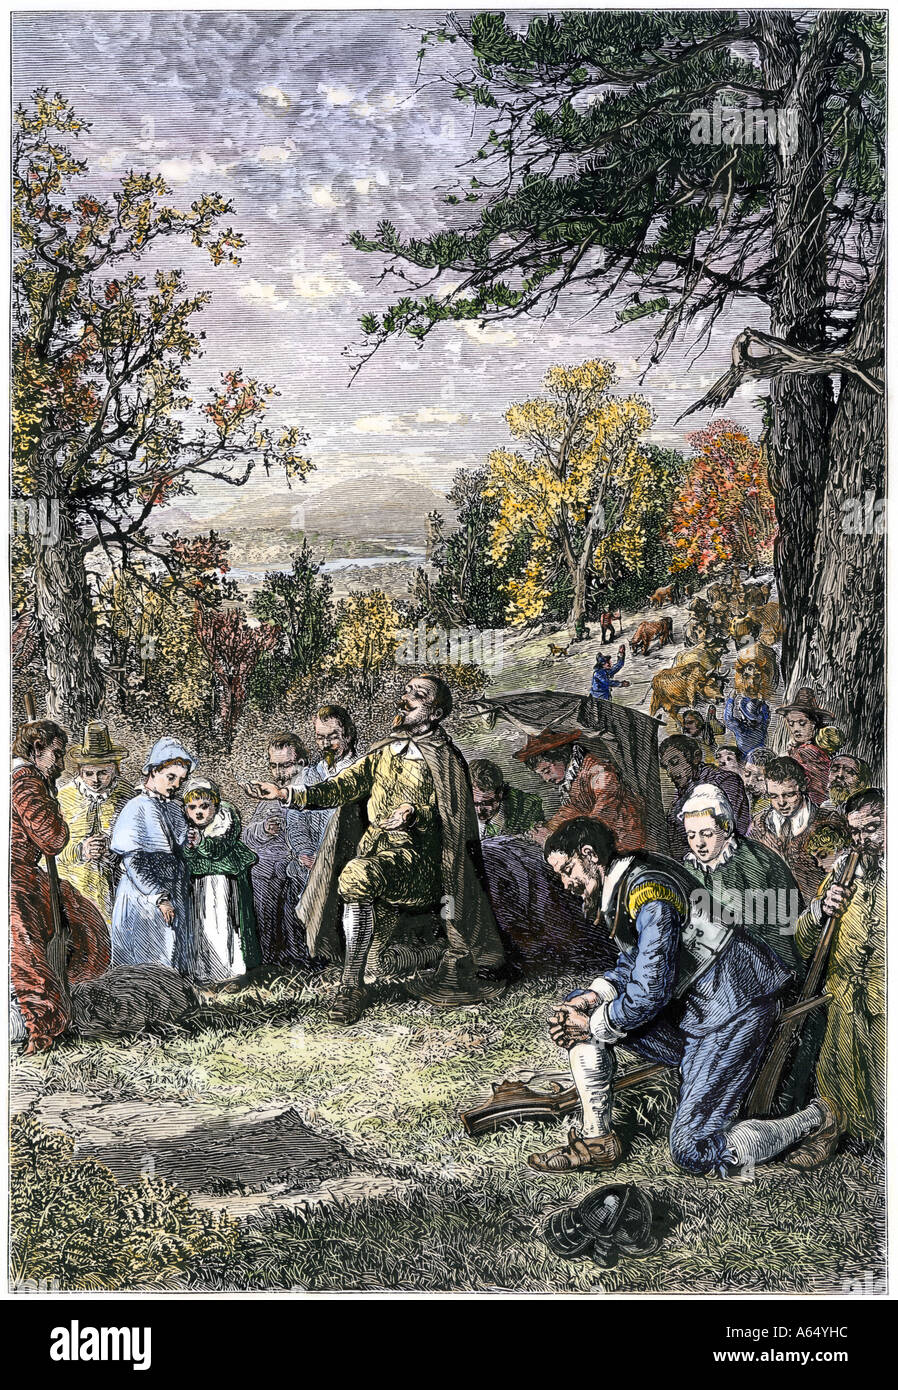 Puritan group led by Joseph Hooker settles Hartford on the Connecticut River 1636. Hand-colored woodcut Stock Photo